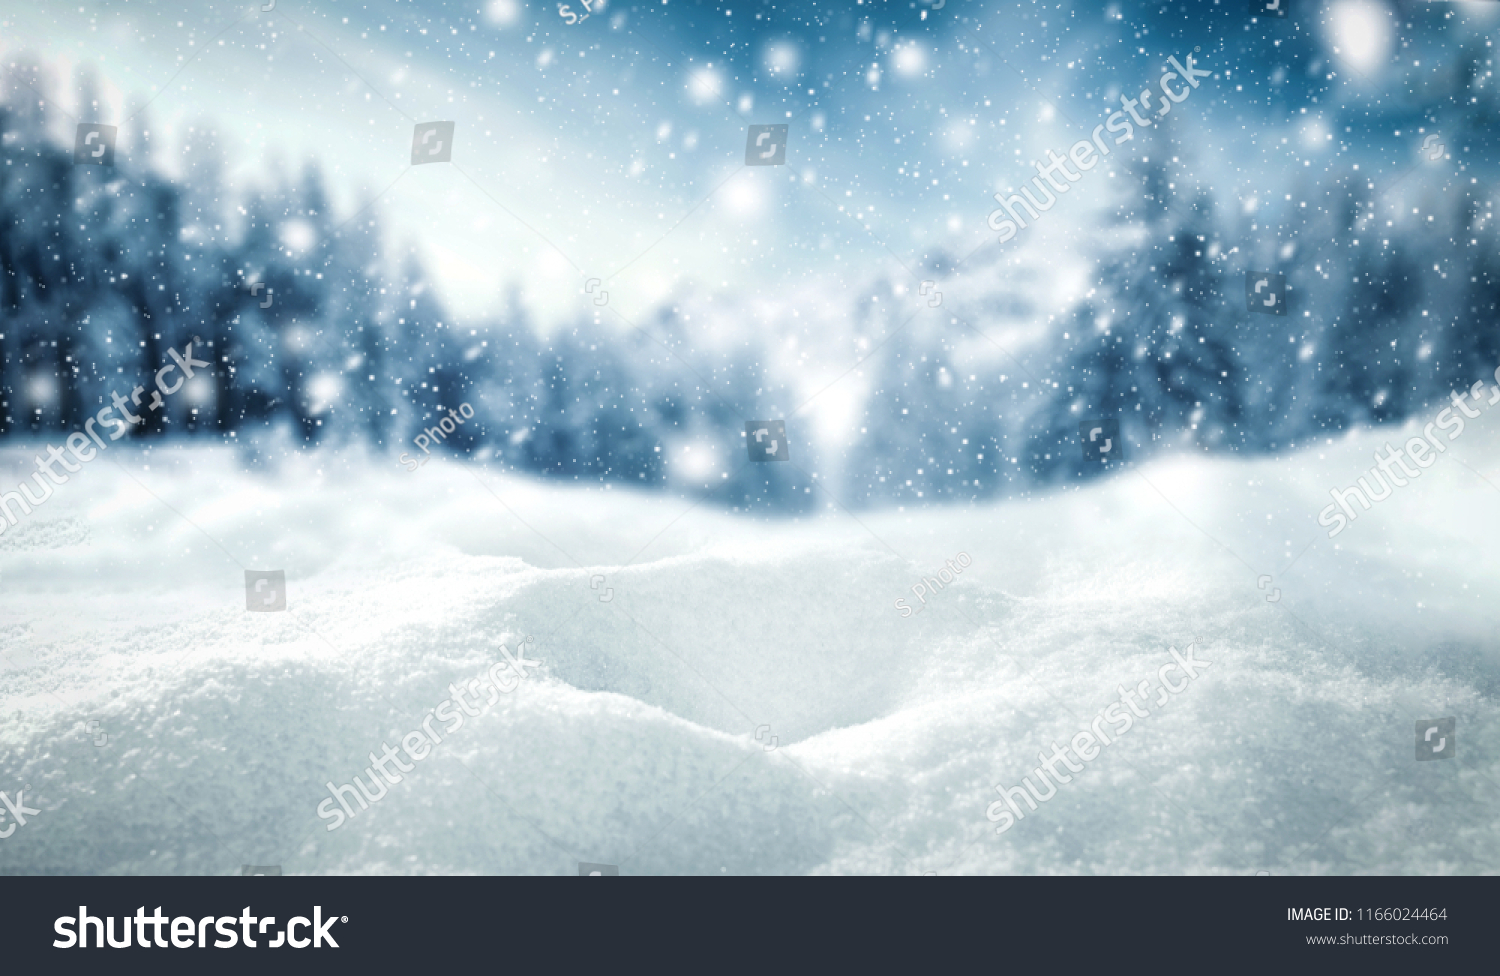 Winter background of snow and frost with free space for your decoration.  #1166024464